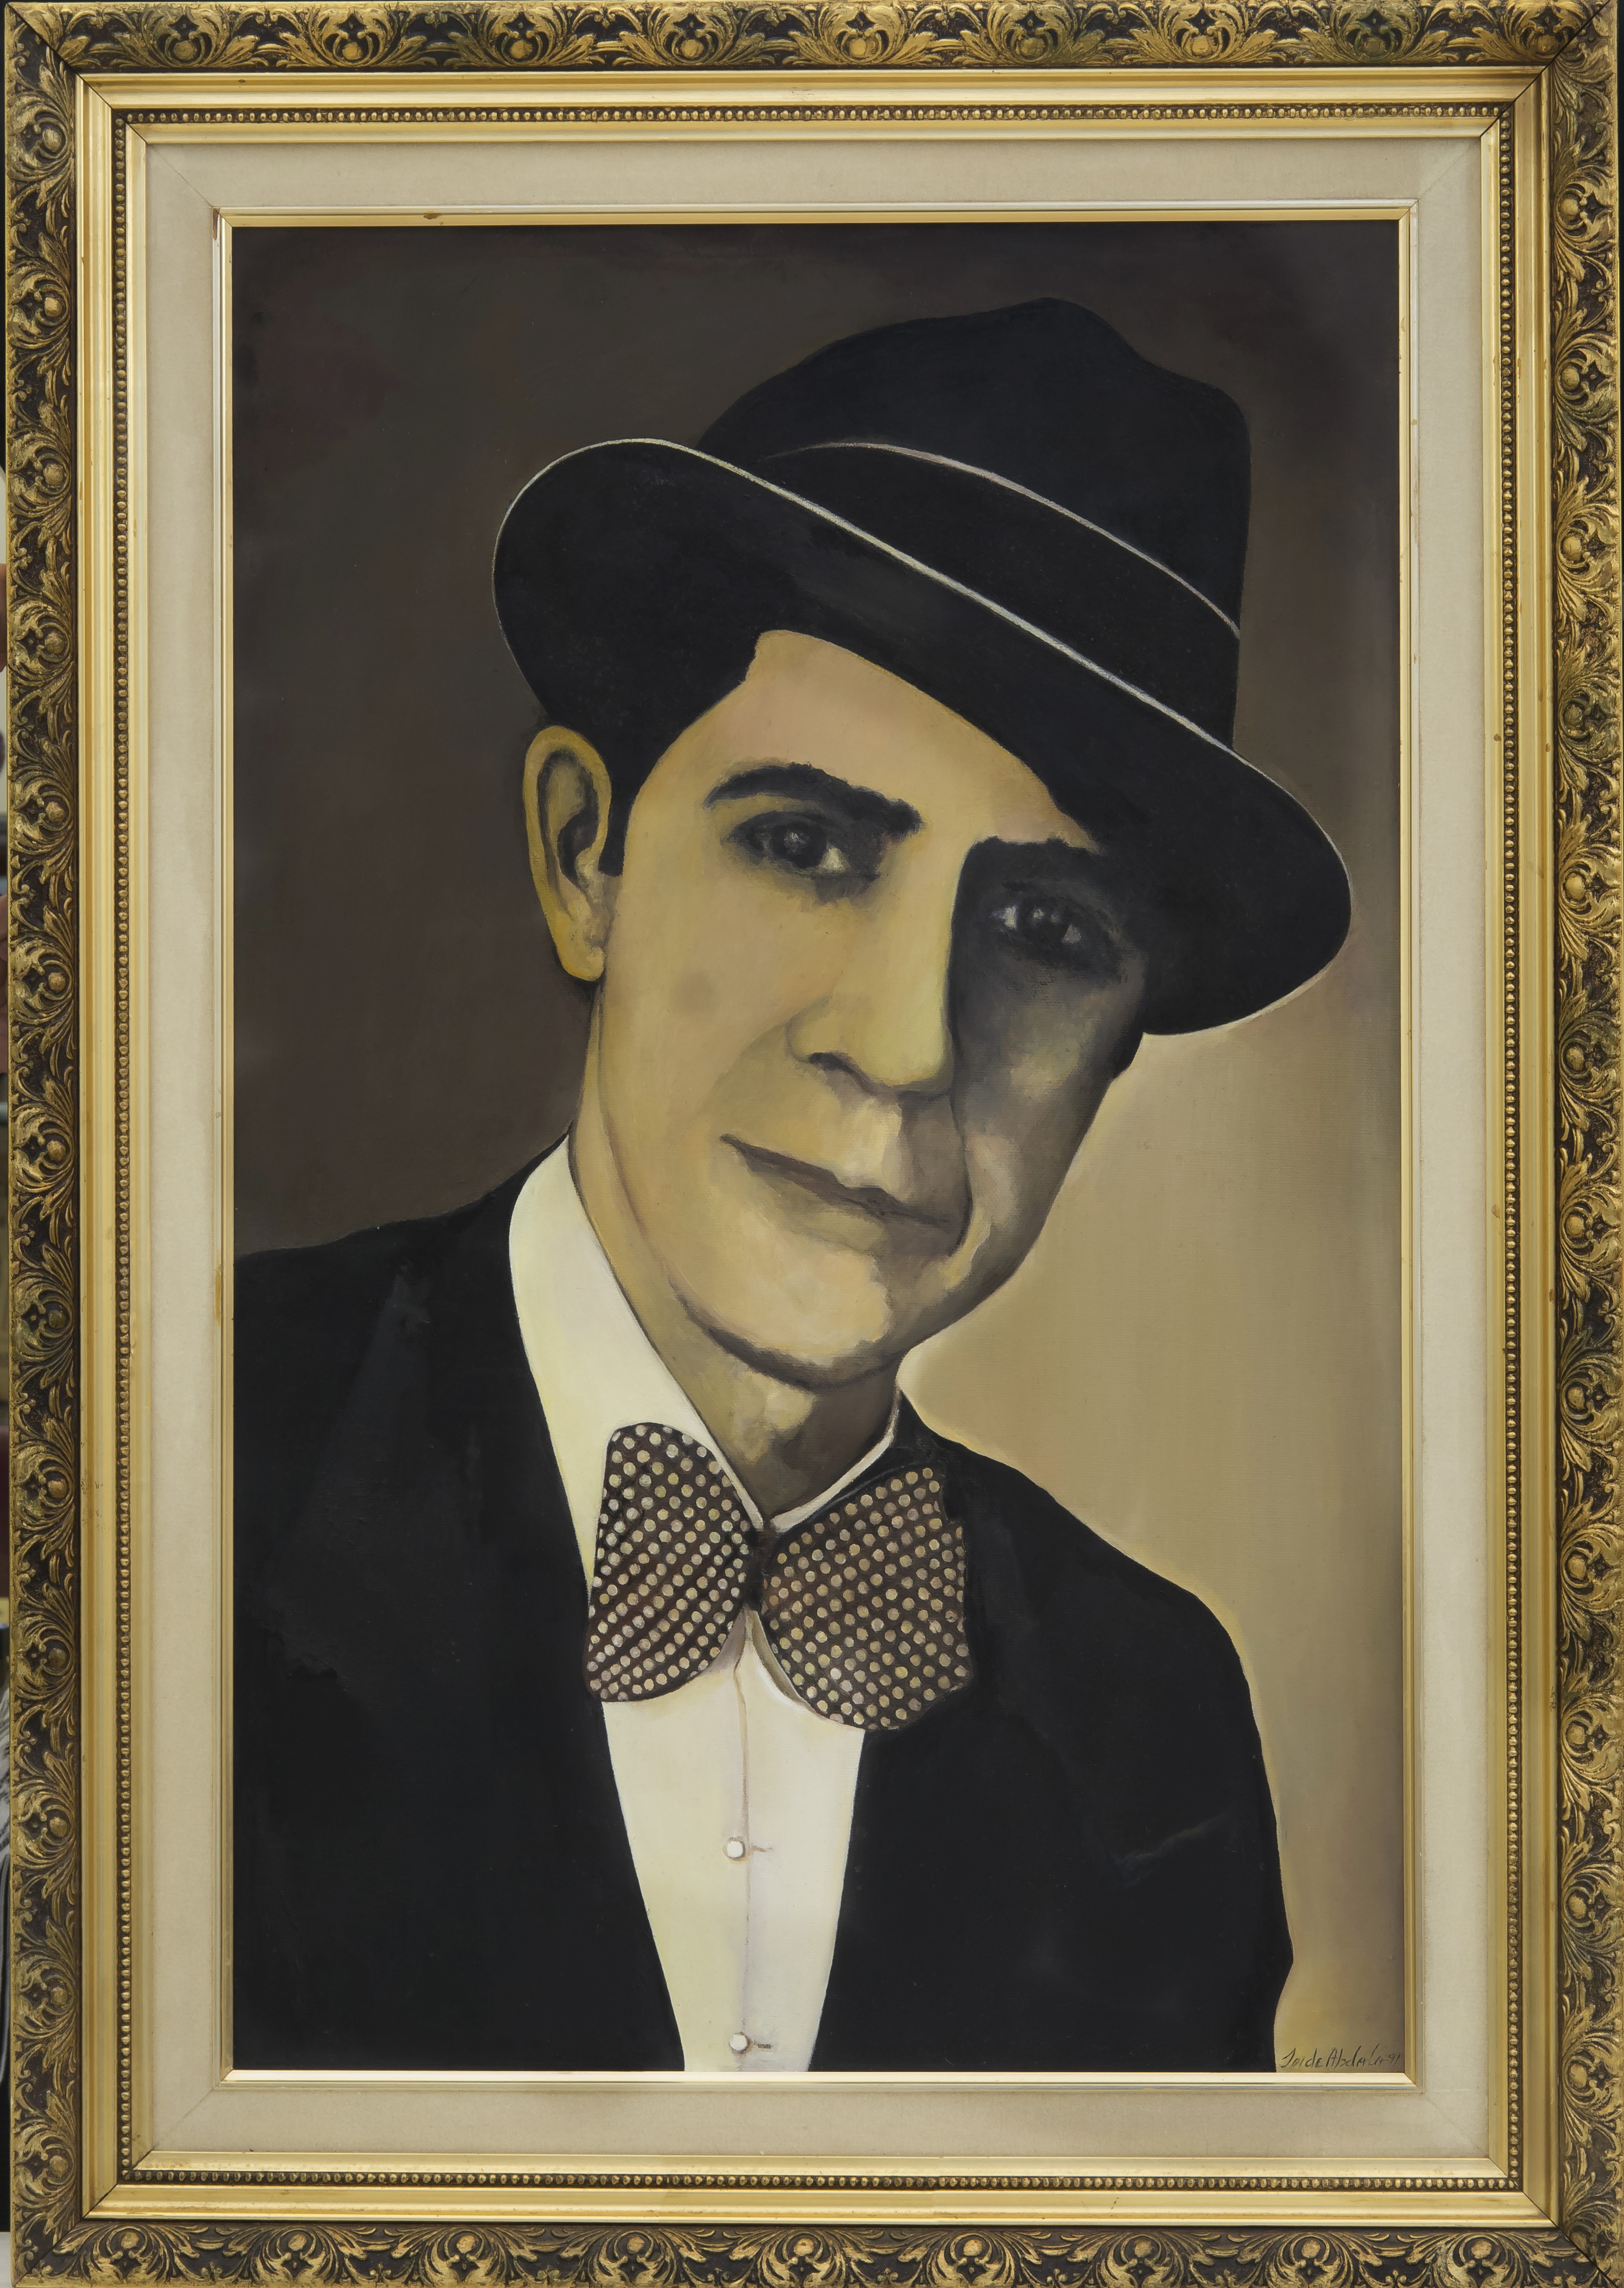 N°11 GARDEL 1933 ( Based on an image from that year ) 0,81cm x 1,14cm